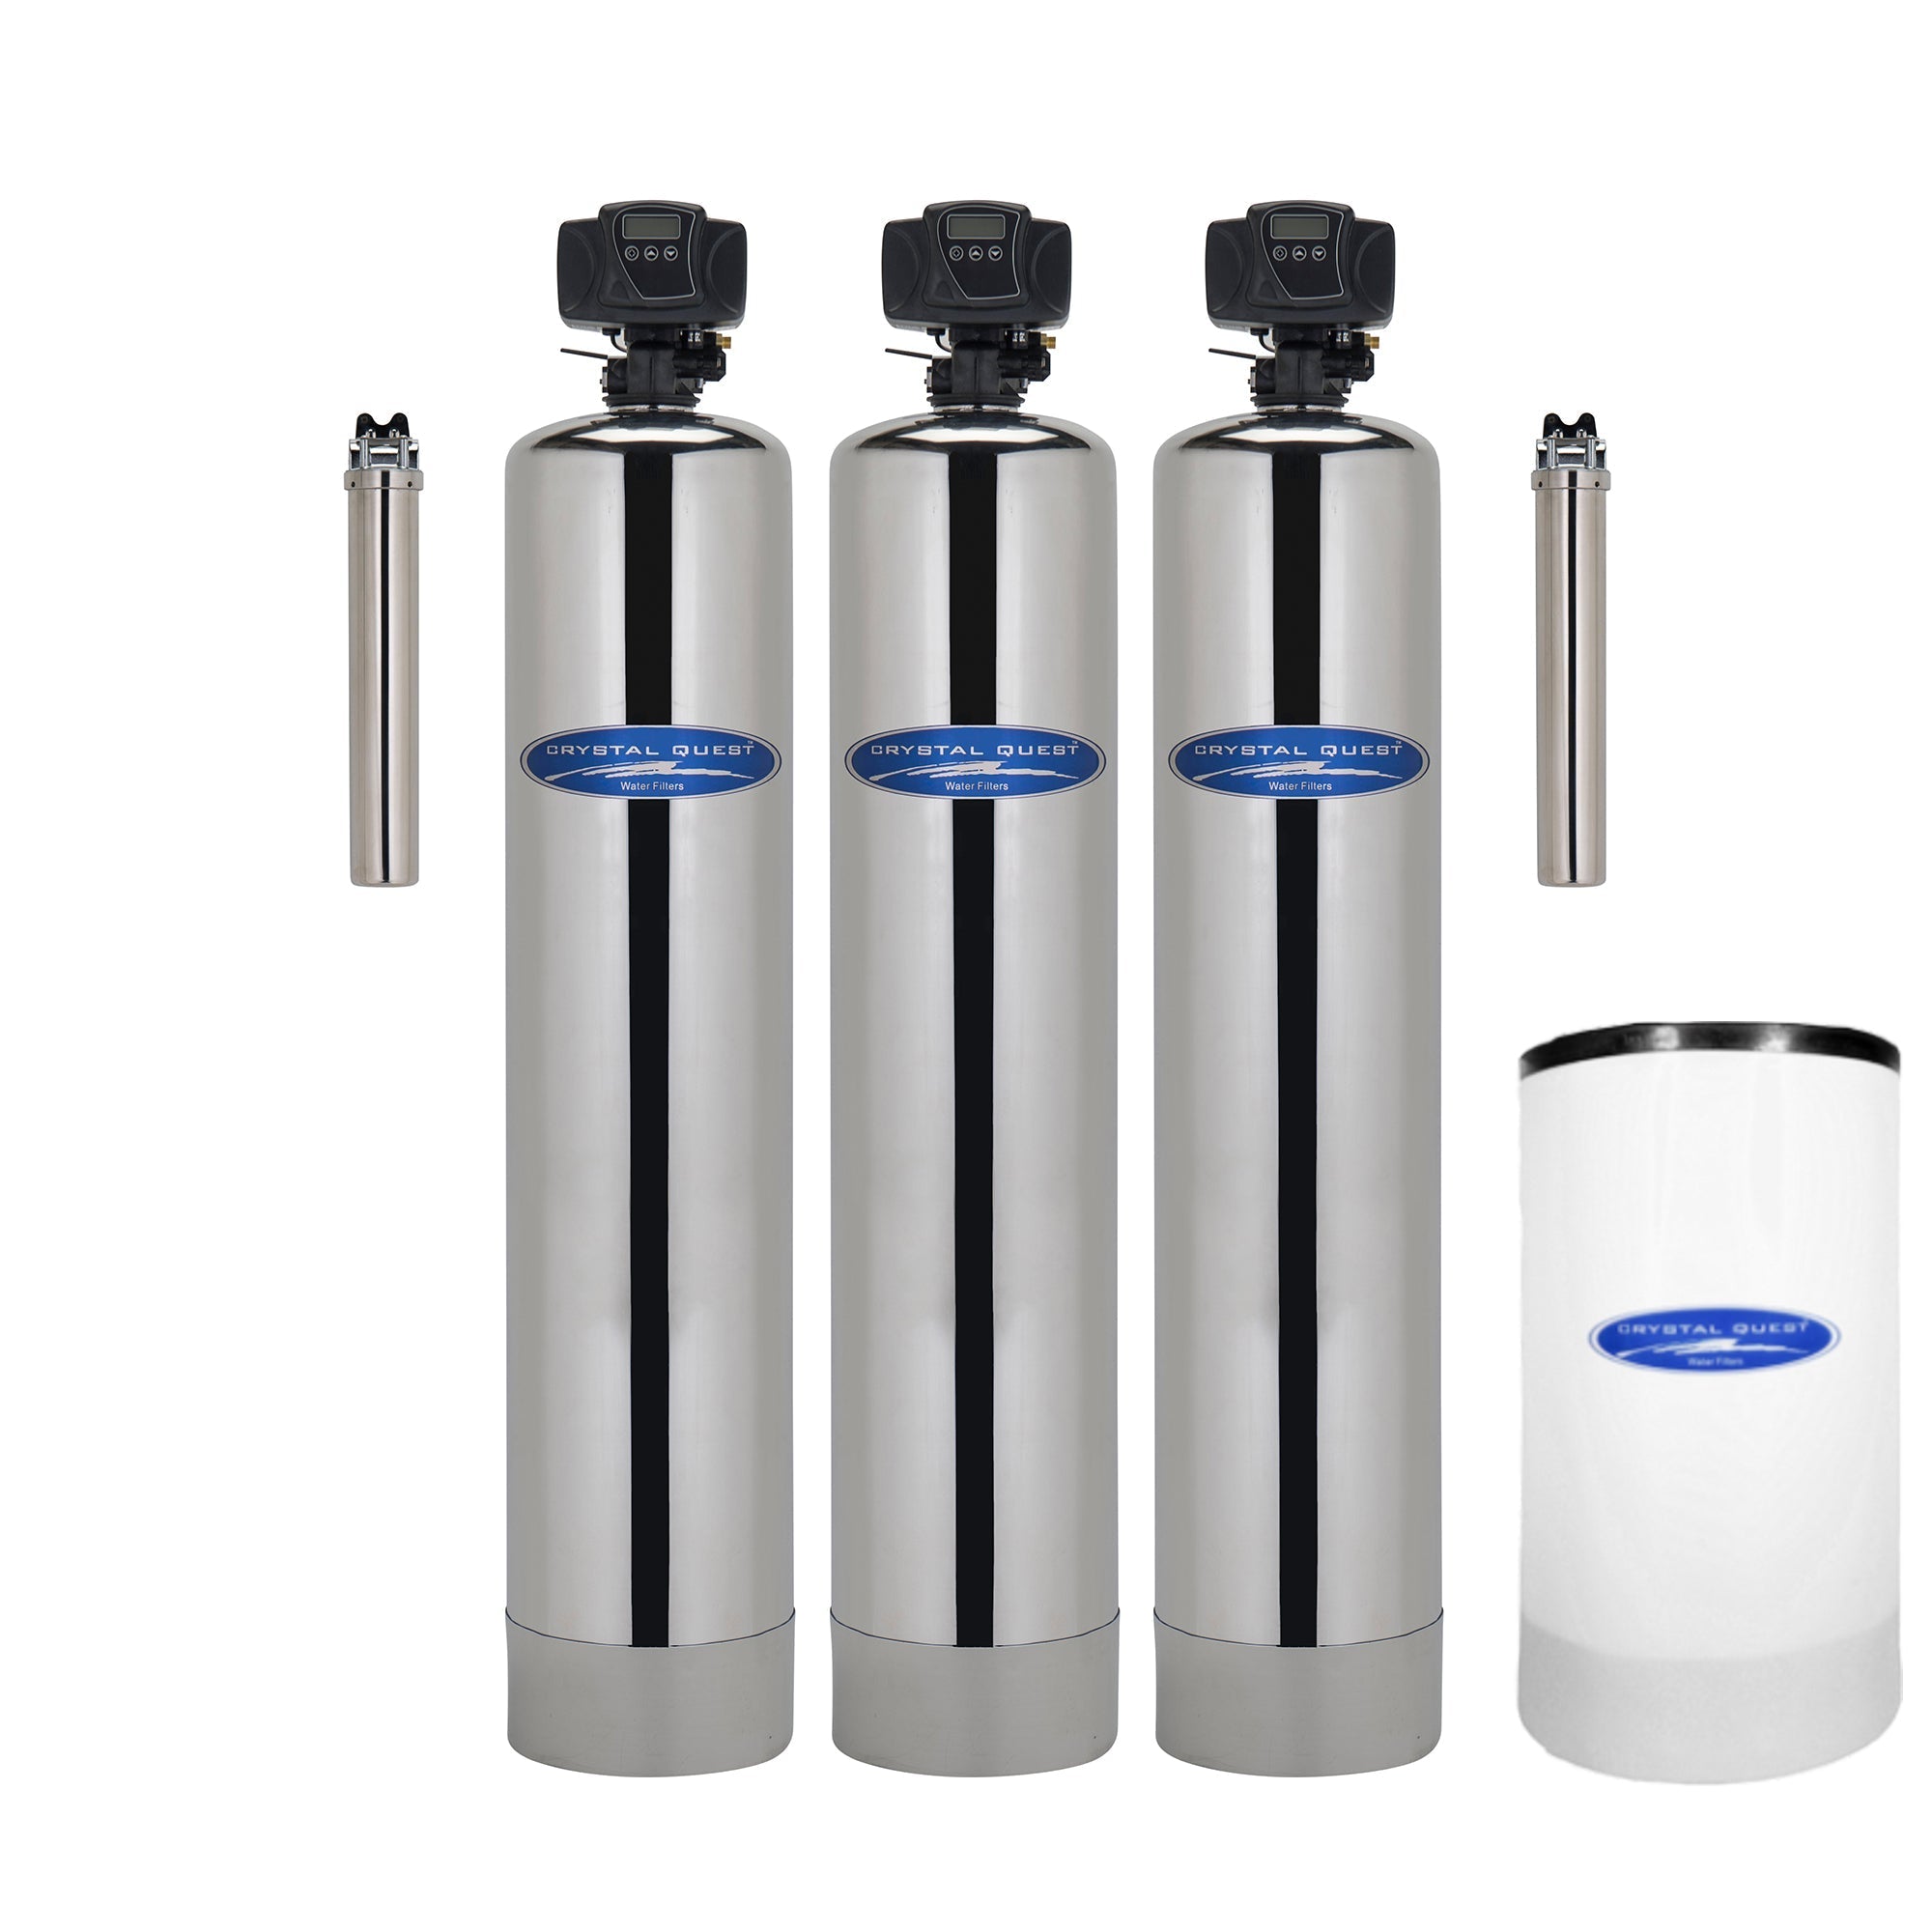 Add SMART Filter and Softener / Stainless Steel / 1.5 Arsenic Whole House Water Filter - Whole House Water Filters - Crystal Quest